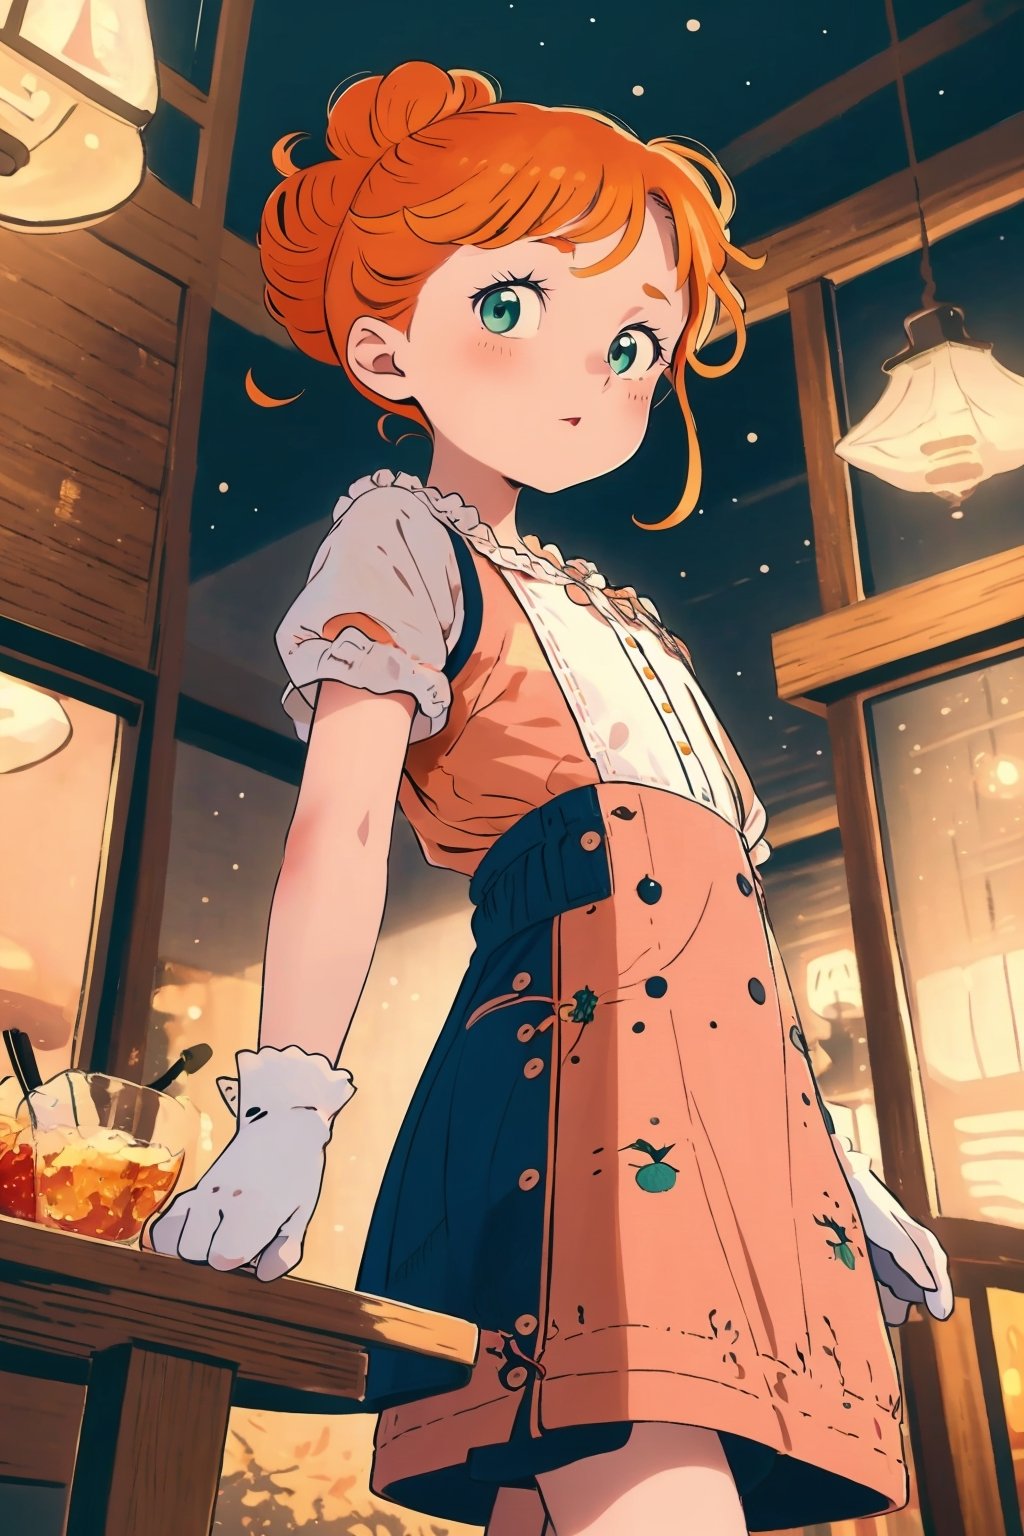 Imagine an adorable girl with wild short curly orange hair tied. Her eyes are a vivid, intense shade of green, sparkling with intricate detail. She has a warm, tanned complexion that adds to her charm. She wears a lovely pink dress with a delicate, cute touch, and her hands are adorned with white silk gloves. The background is a charming bar scene with dim lighting, creating a cozy ambiance. This artwork captures the essence of innocence and cuteness against the backdrop of a beautiful yet dimly lit setting, detailed, detail_eyes, detailed_hair, detailed_scenario, detailed_hands, detailed_background.